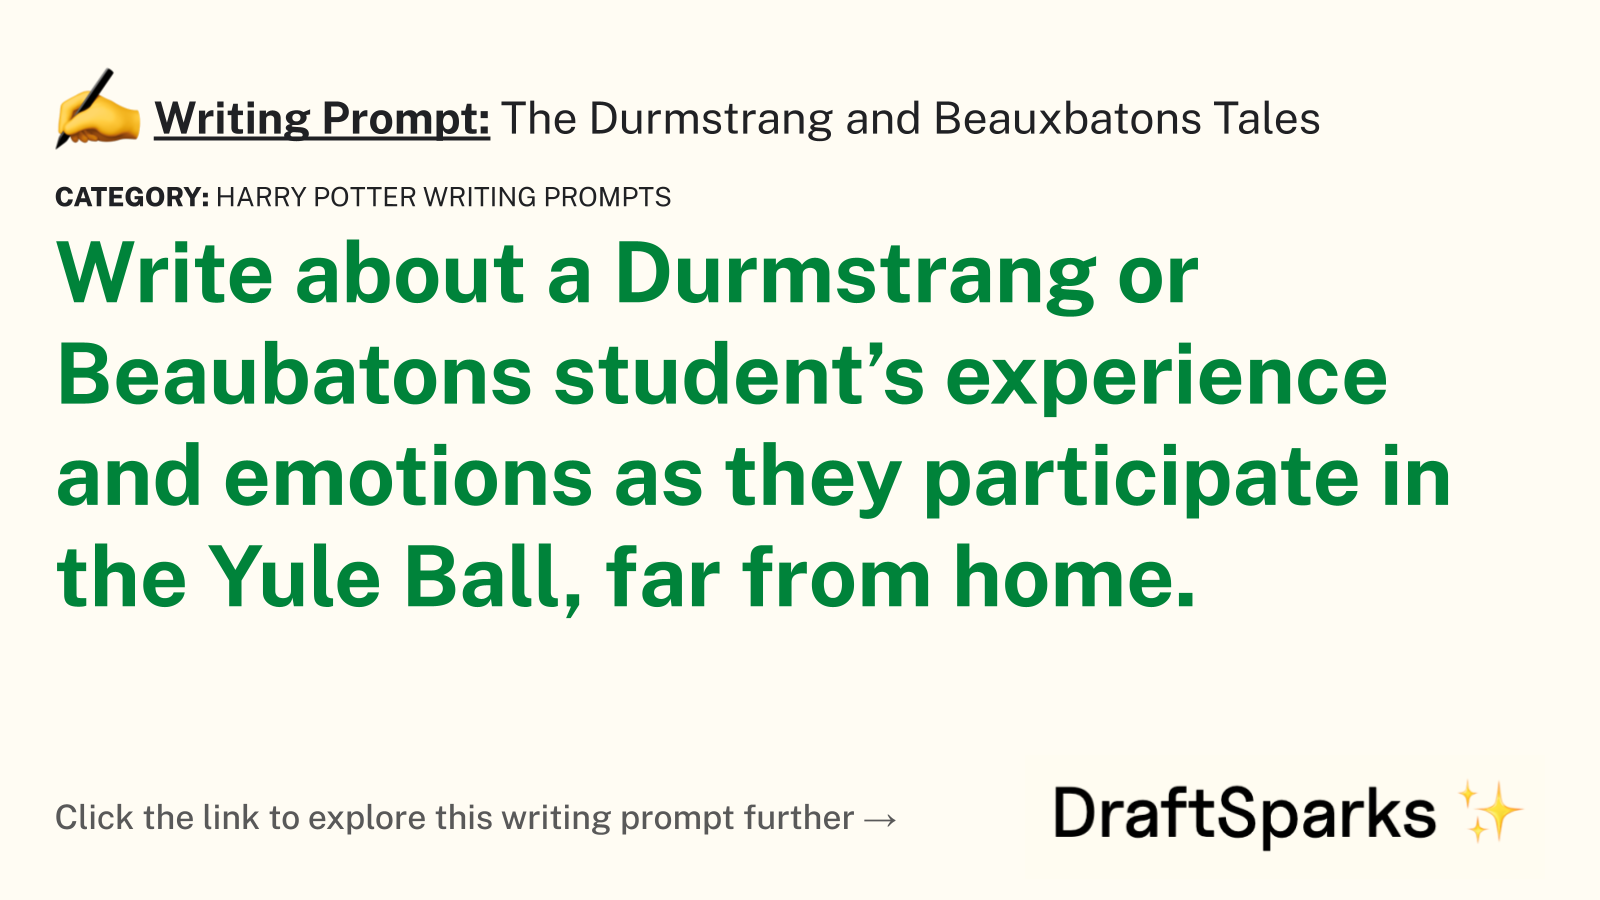 The Durmstrang and Beauxbatons Tales